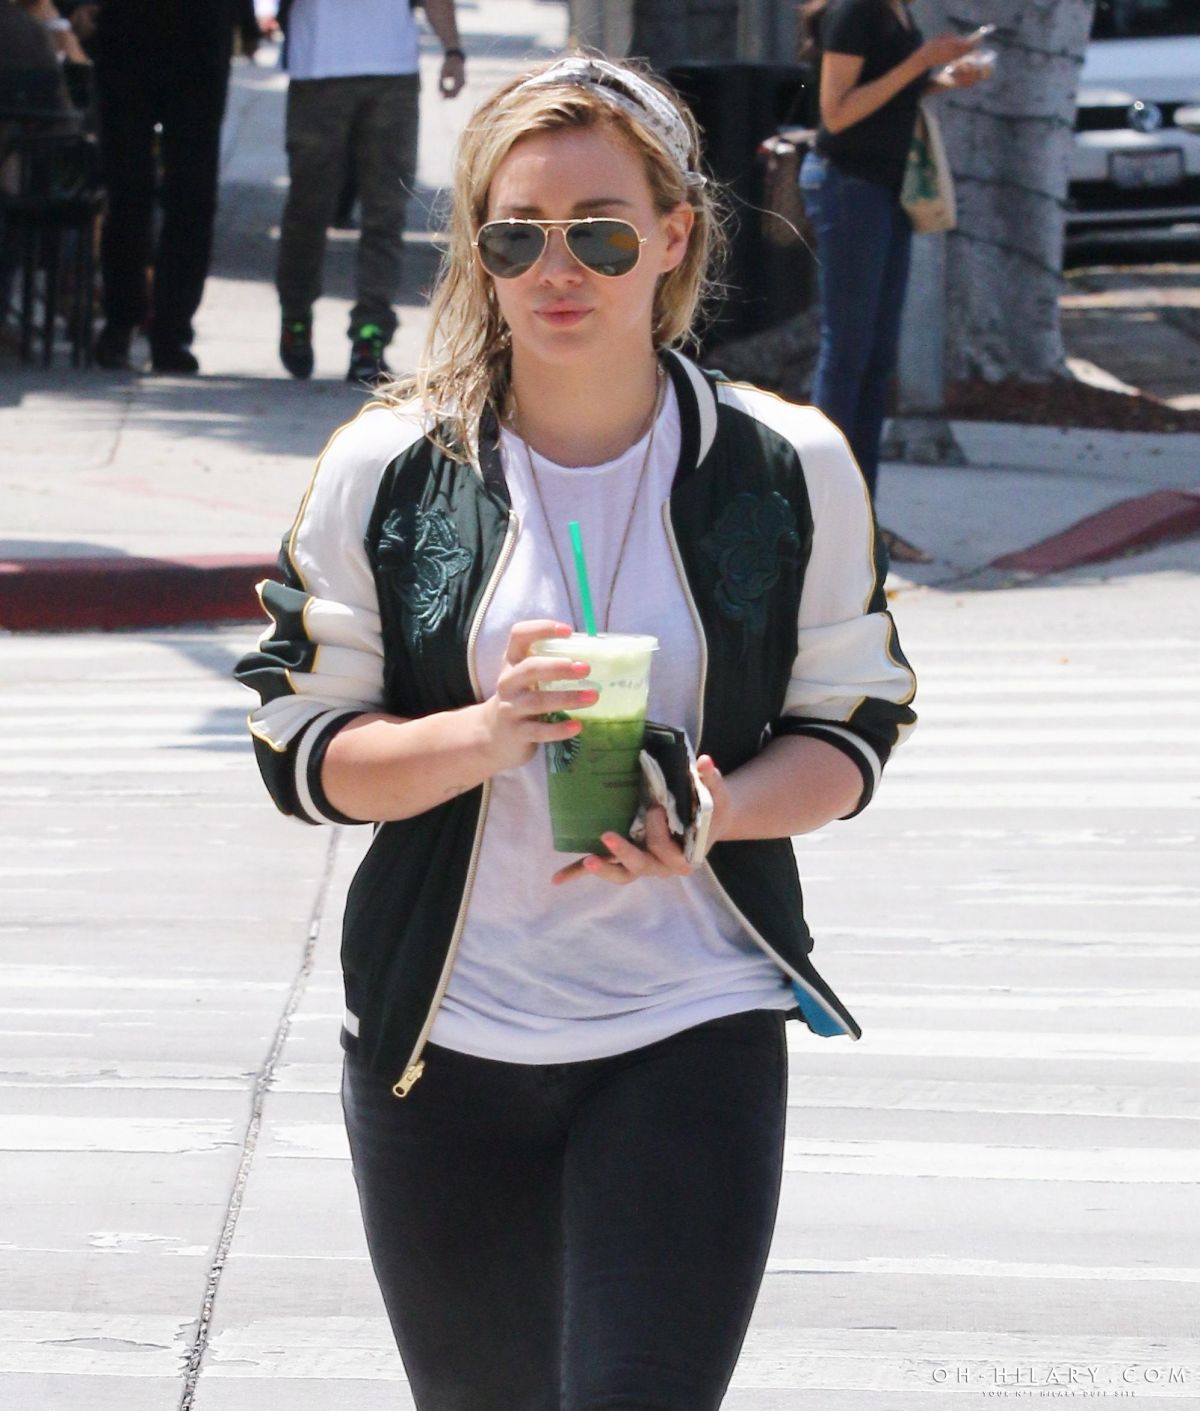 HILARY DUFF at Starbucks in West Hollywood – HawtCelebs